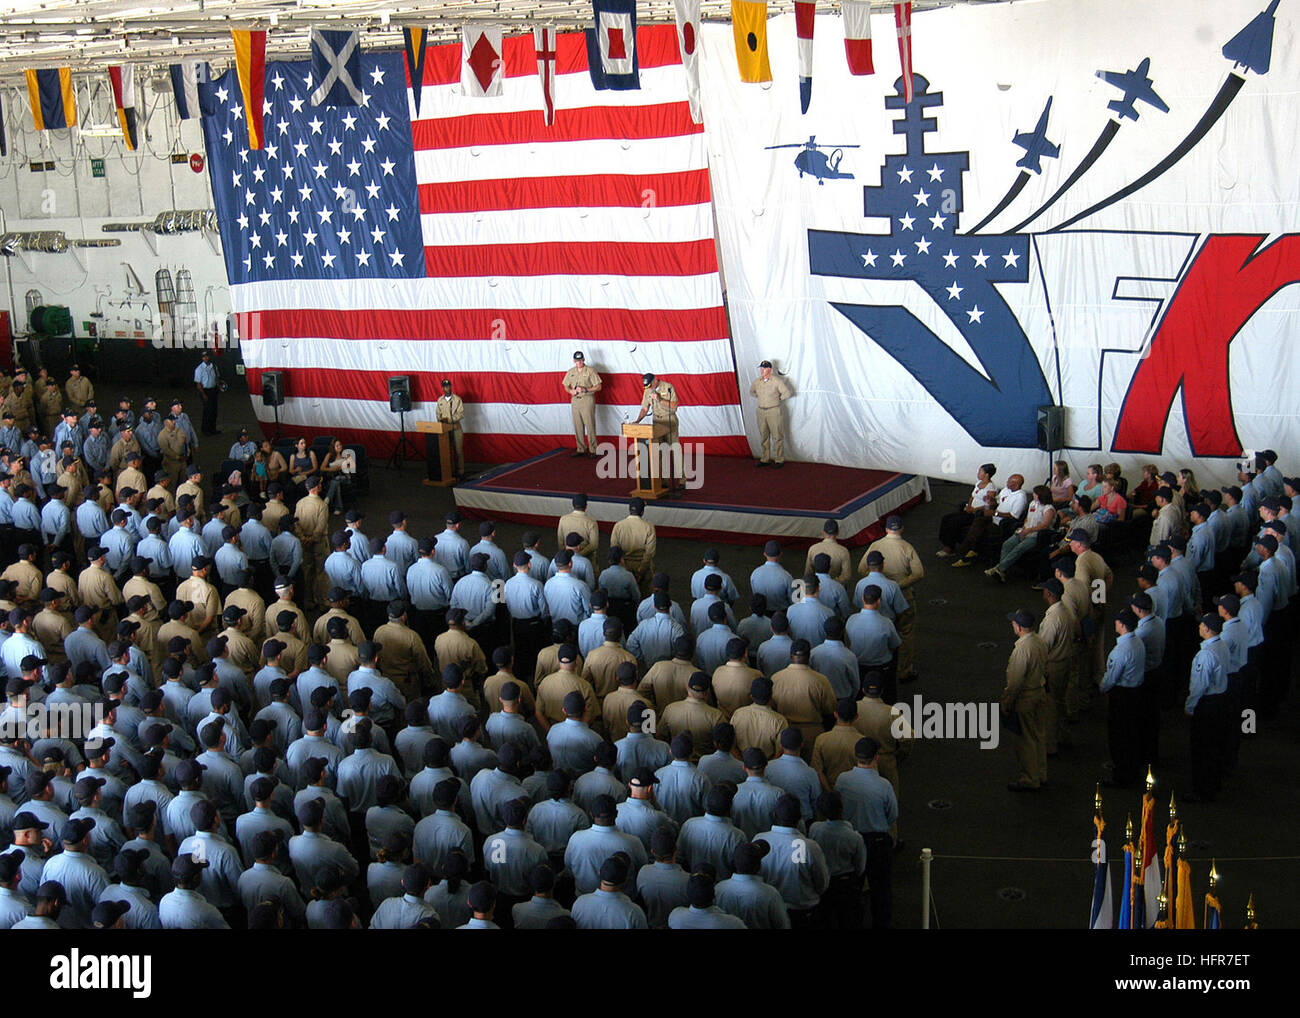 060608-N-6155A-001 Mayport, Fla. (June 8, 2006) - Commanding Officer USS John F. Kennedy (CV 67), Capt. Todd A. Zecchin, congratulates 178 Sailors on their promotion to the next higher pay grade as all hands observe the advancement ceremony aboard the conventionally-powered aircraft carrier. The frockees also received congratulations from friends and family members present at the event. Through an aggressive study program, 59 more Kennedy Sailors advanced during this advancement cycle compared to the previous cycle. U.S. Navy photo by PhotographerÕs Mate Airman Nathan Anderson (RELEASED) US Na Stock Photo